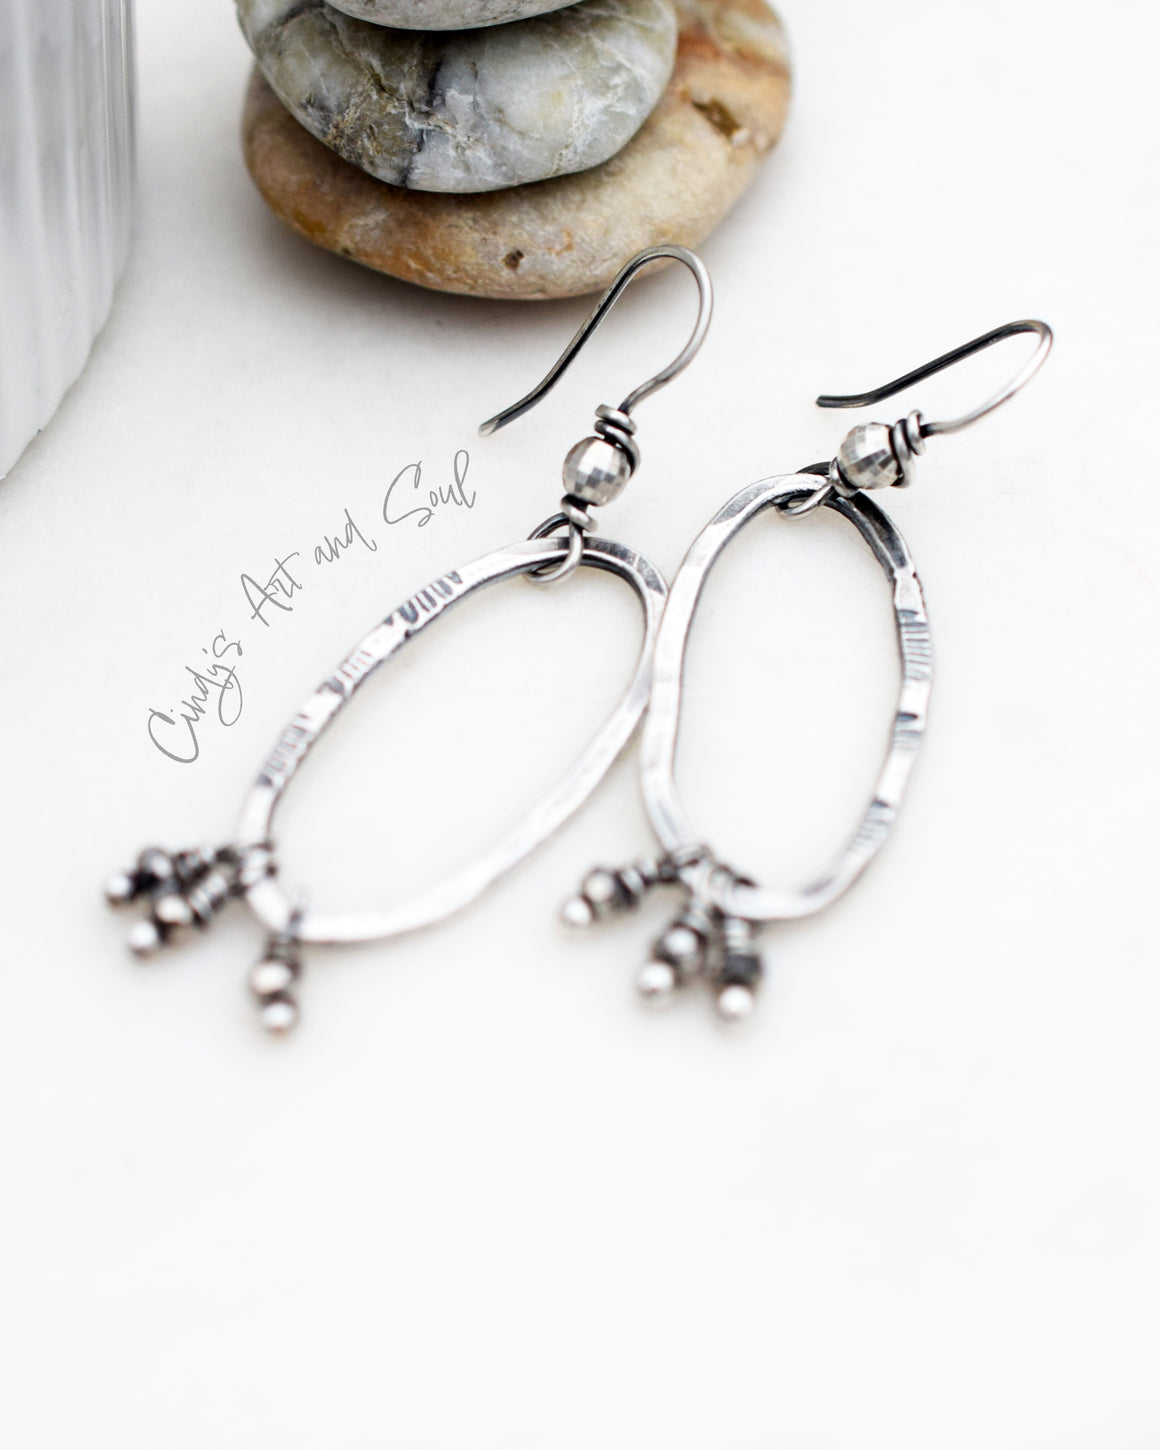 all silver hoop earrings hanging from a white bowl with a stack of stones next to it.